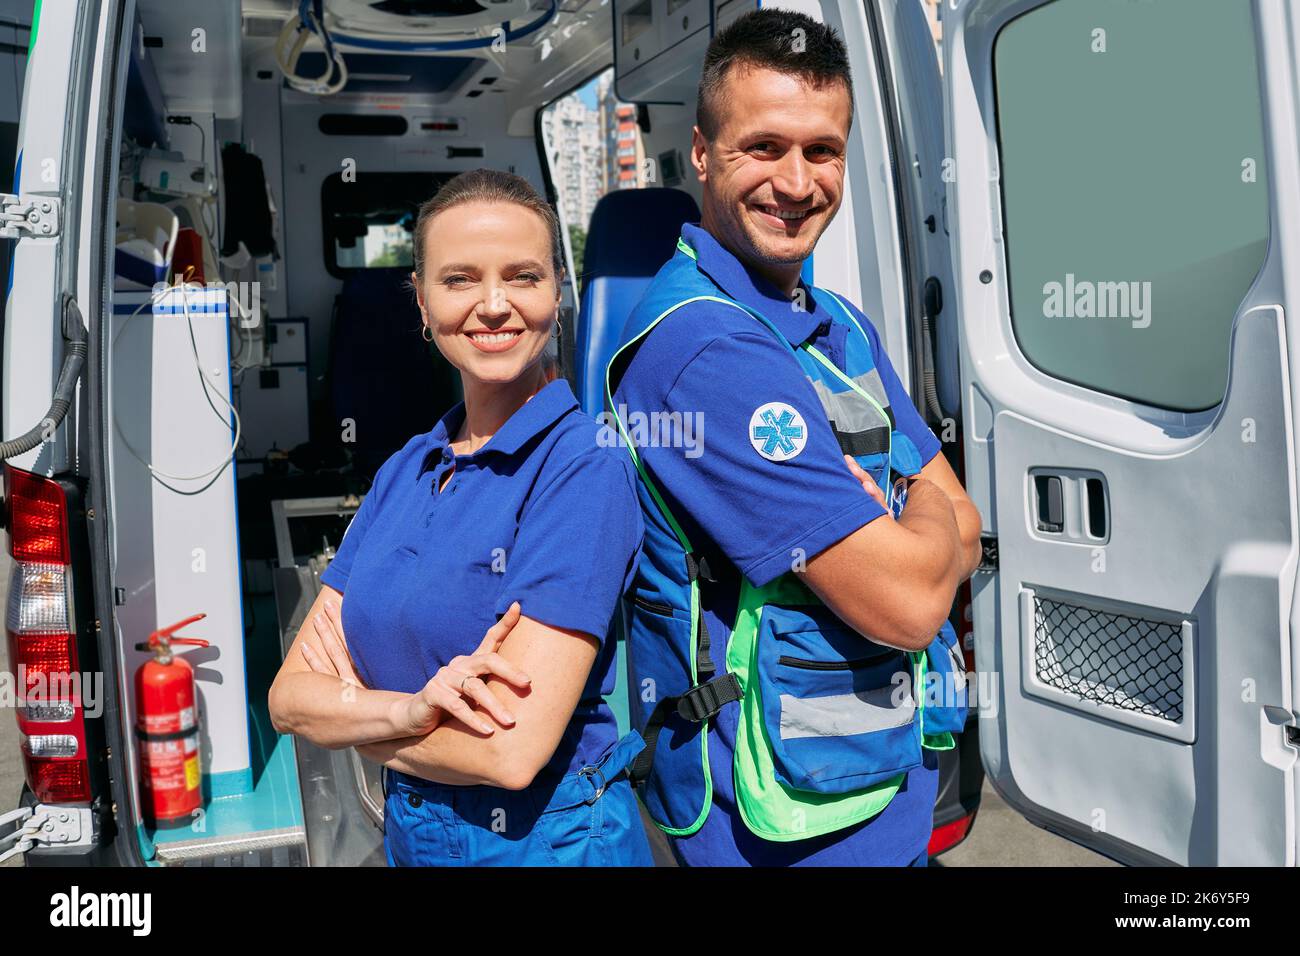 Ambulance medical staff. Portrait of paramedics team standing near their ambulance vehicle with crossed arms and looking at camera Stock Photo